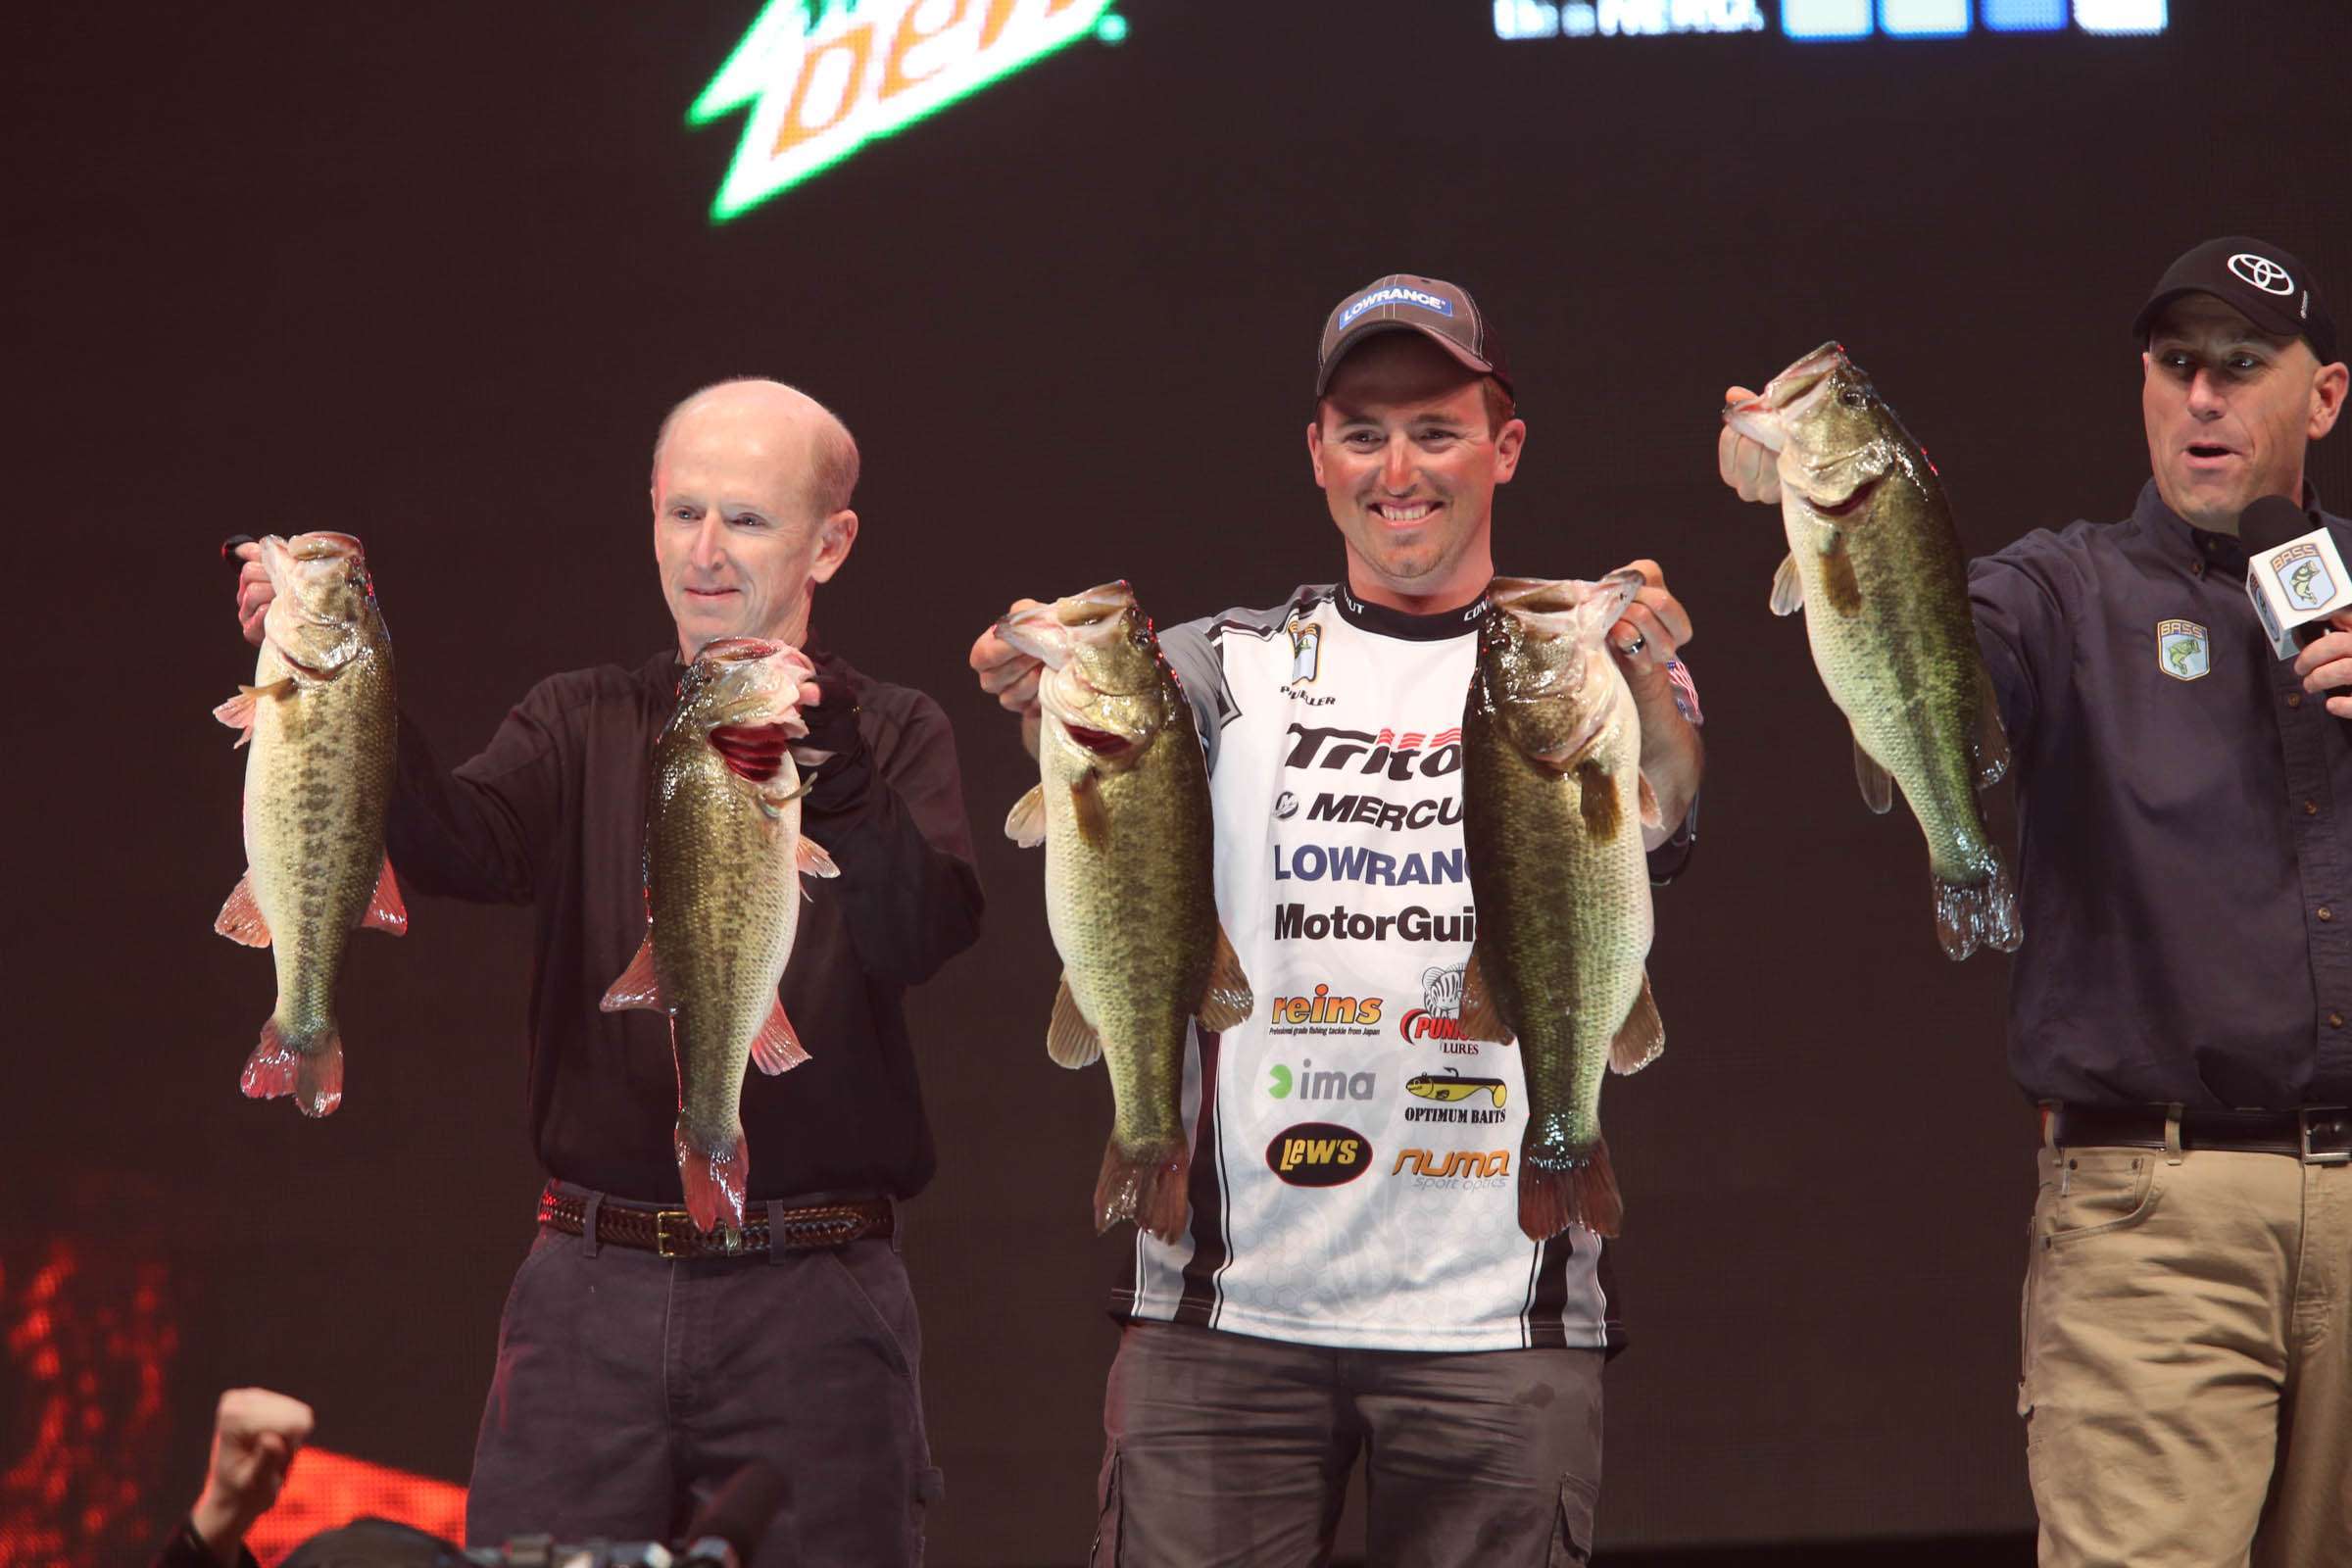 Current Bassmaster Elite Series pro Paul Mueller fished the 2014 Bassmaster Classic as a B.A.S.S. Nation angler. He finished second with an eye-popping catch of more than 32 pounds on Day 2.